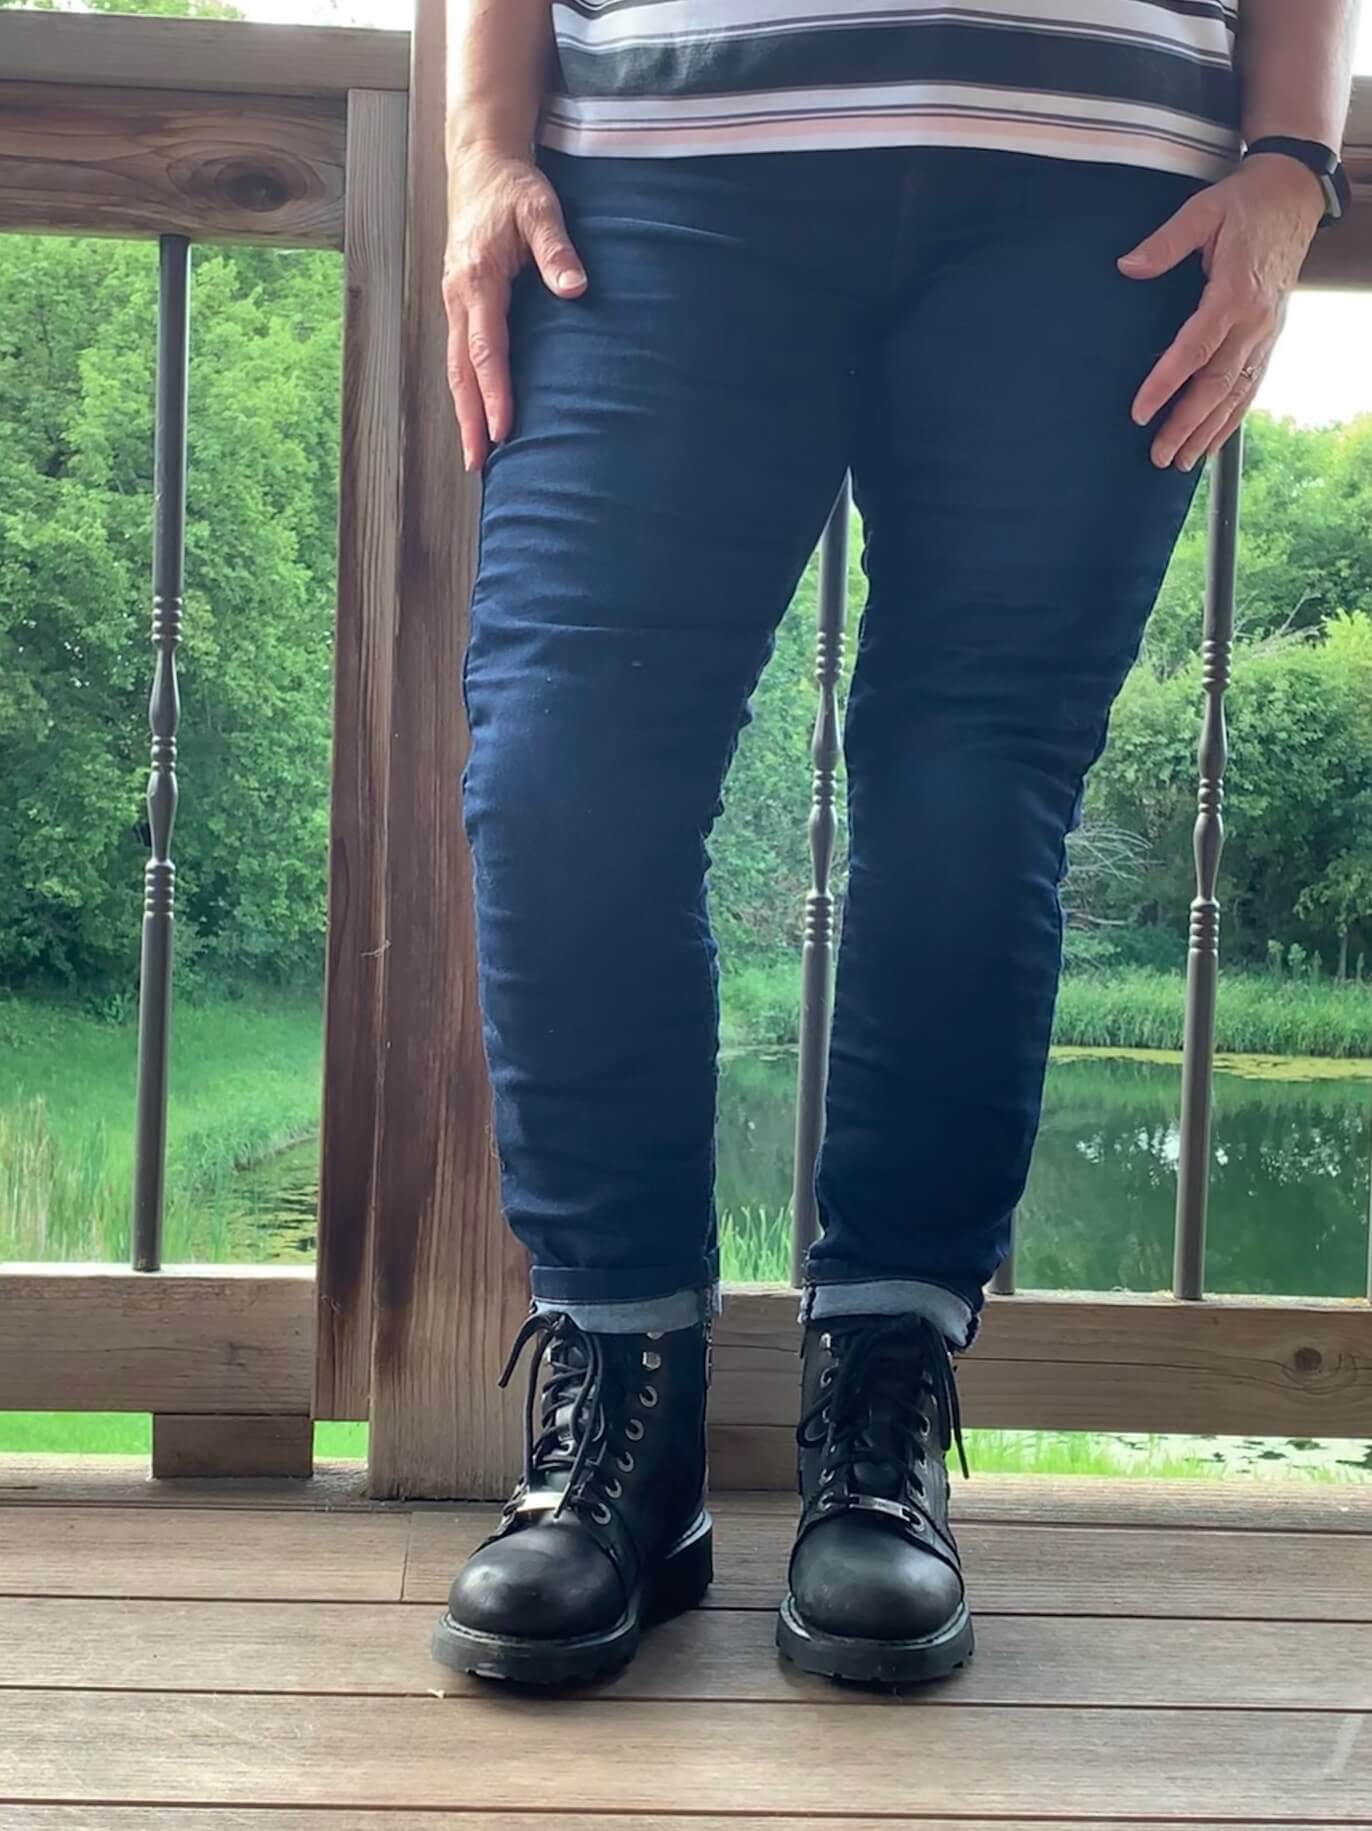 Oxford Women's Super Jeggings Review: Protection & Style